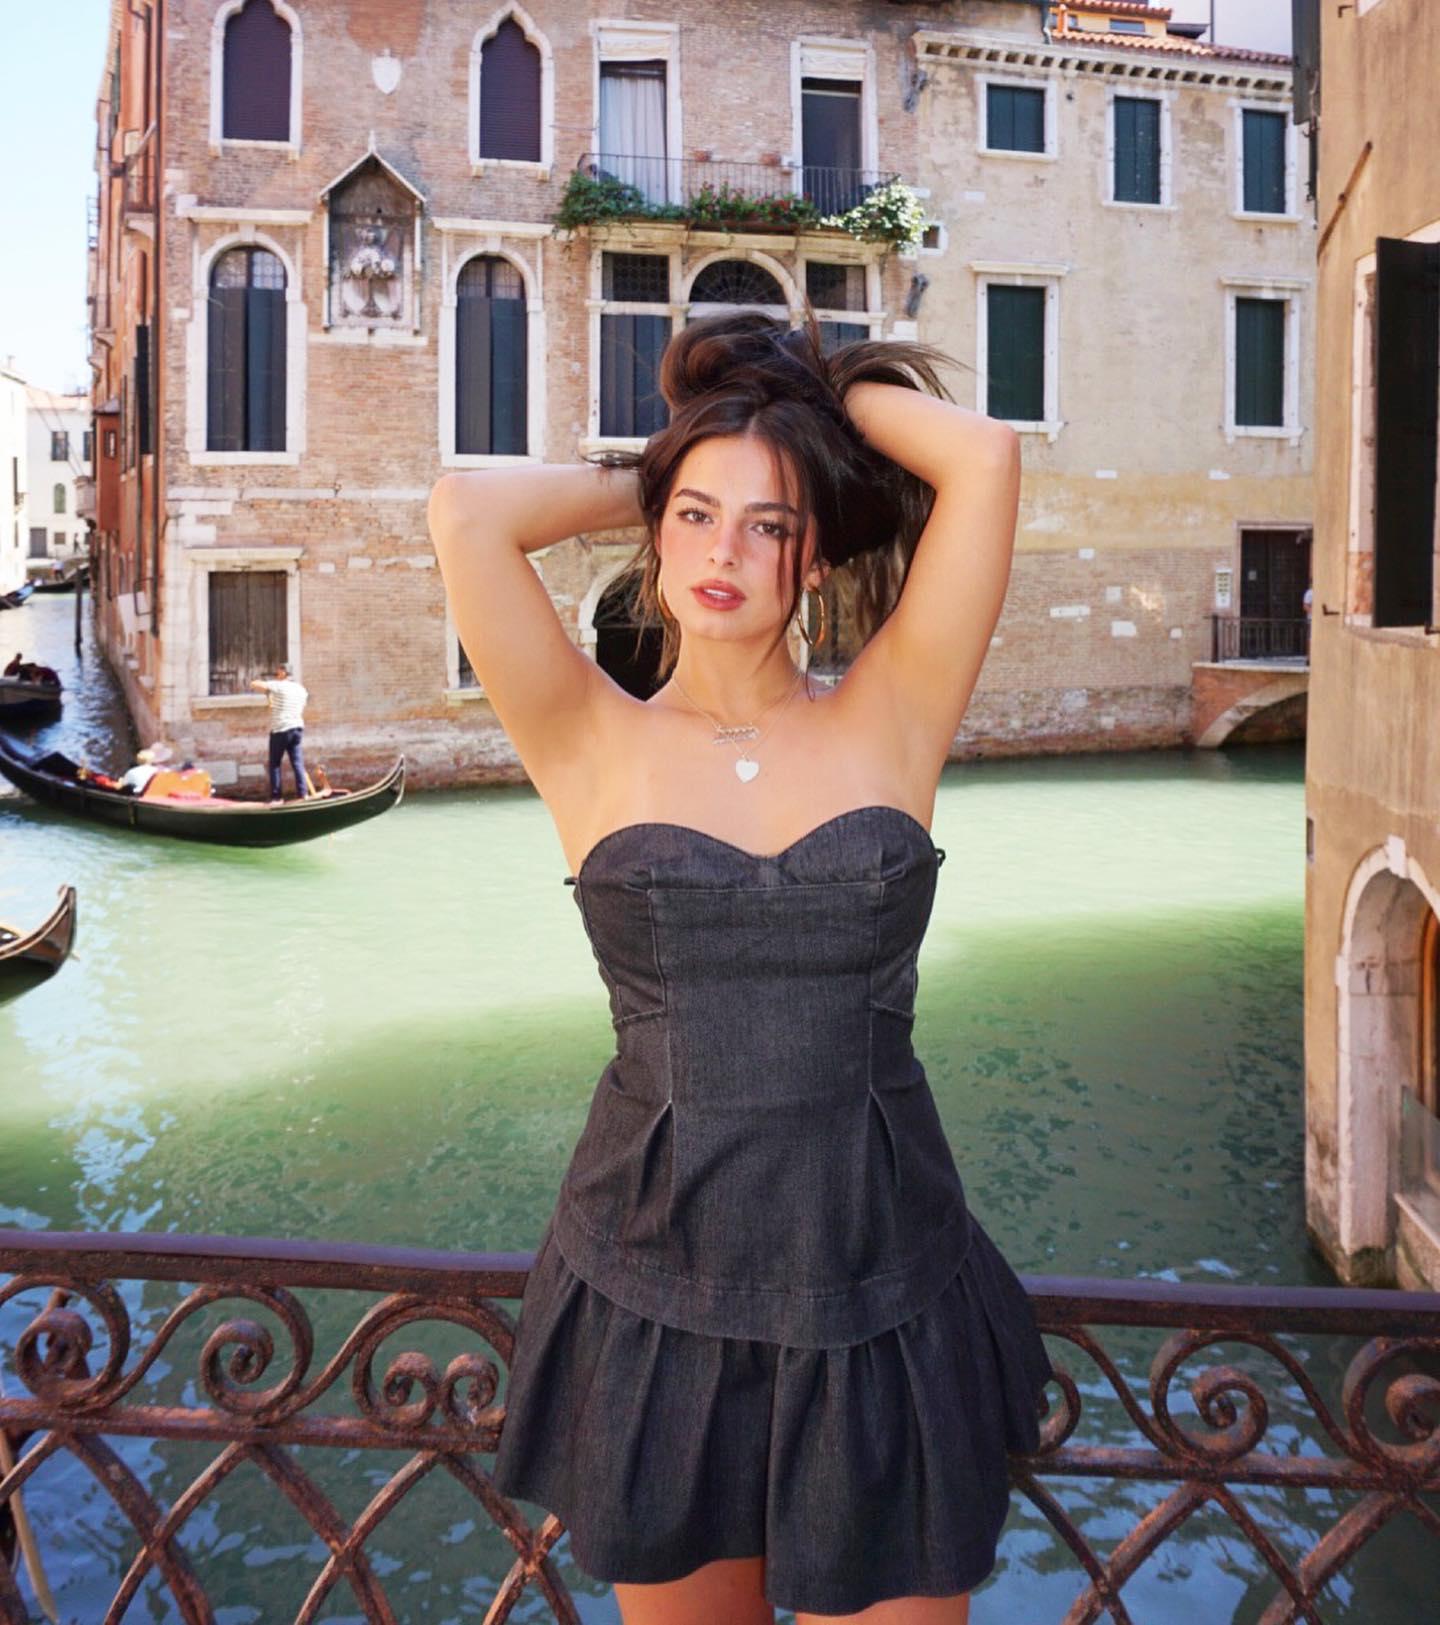 Addison Rae on vacation in Venice, Italy